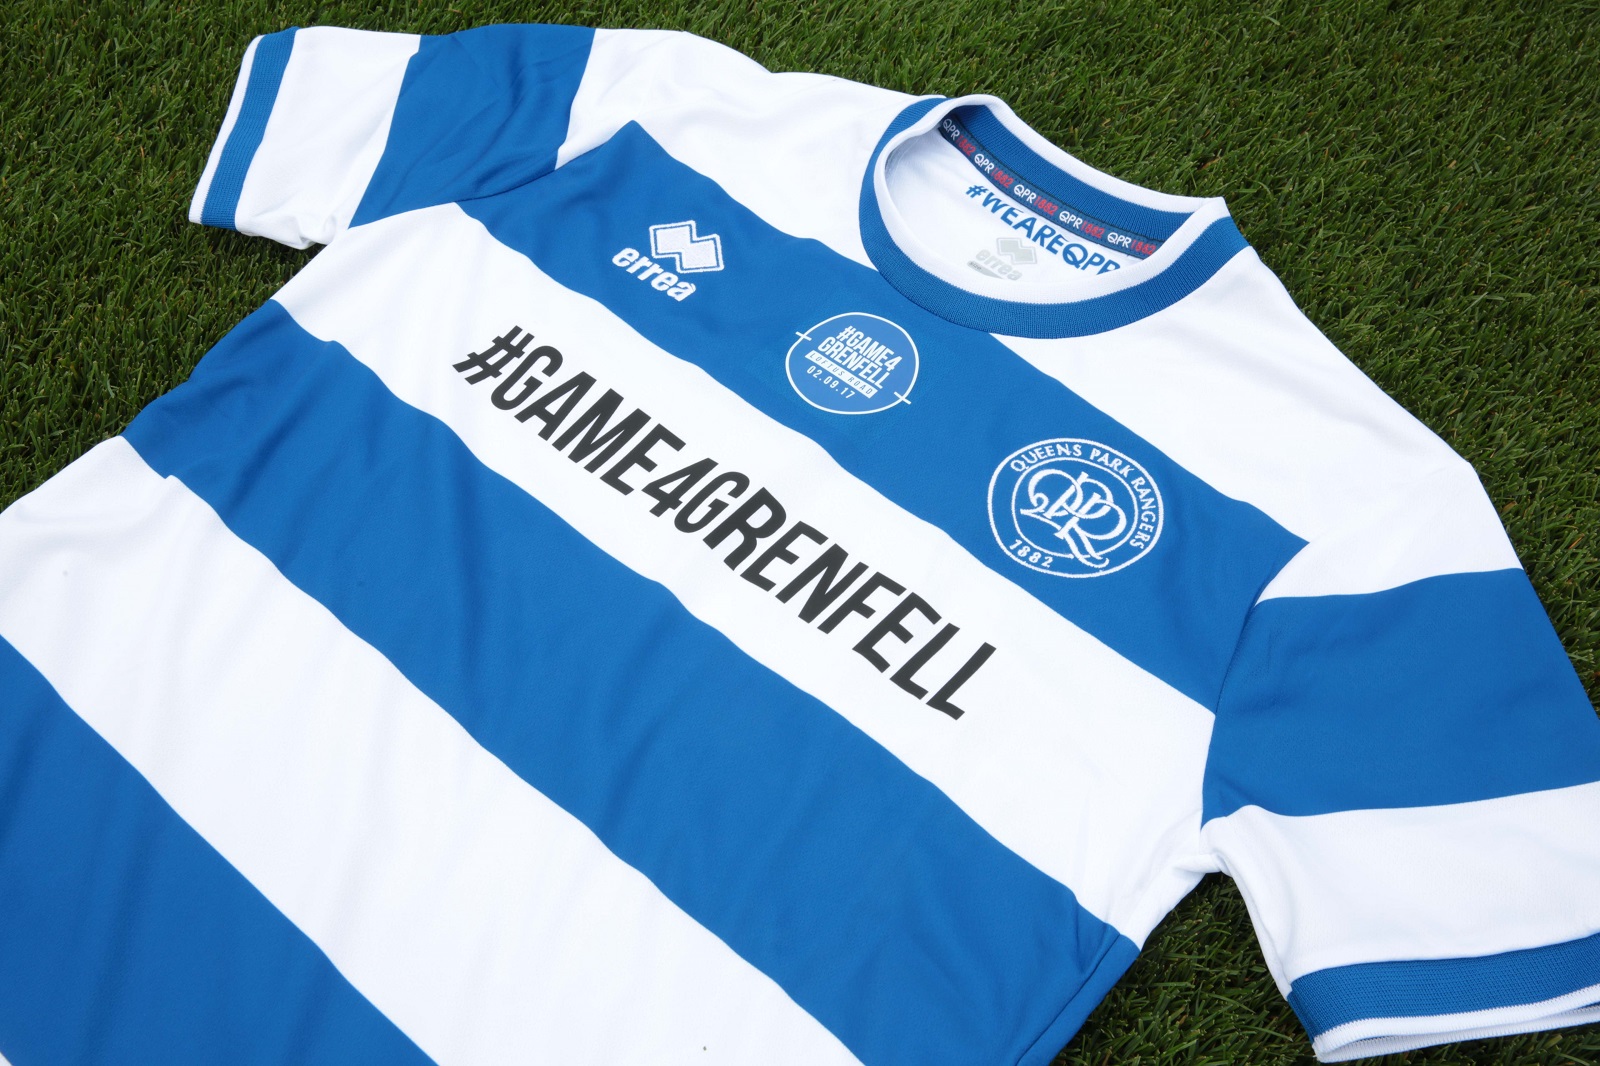 Game4Grenfell